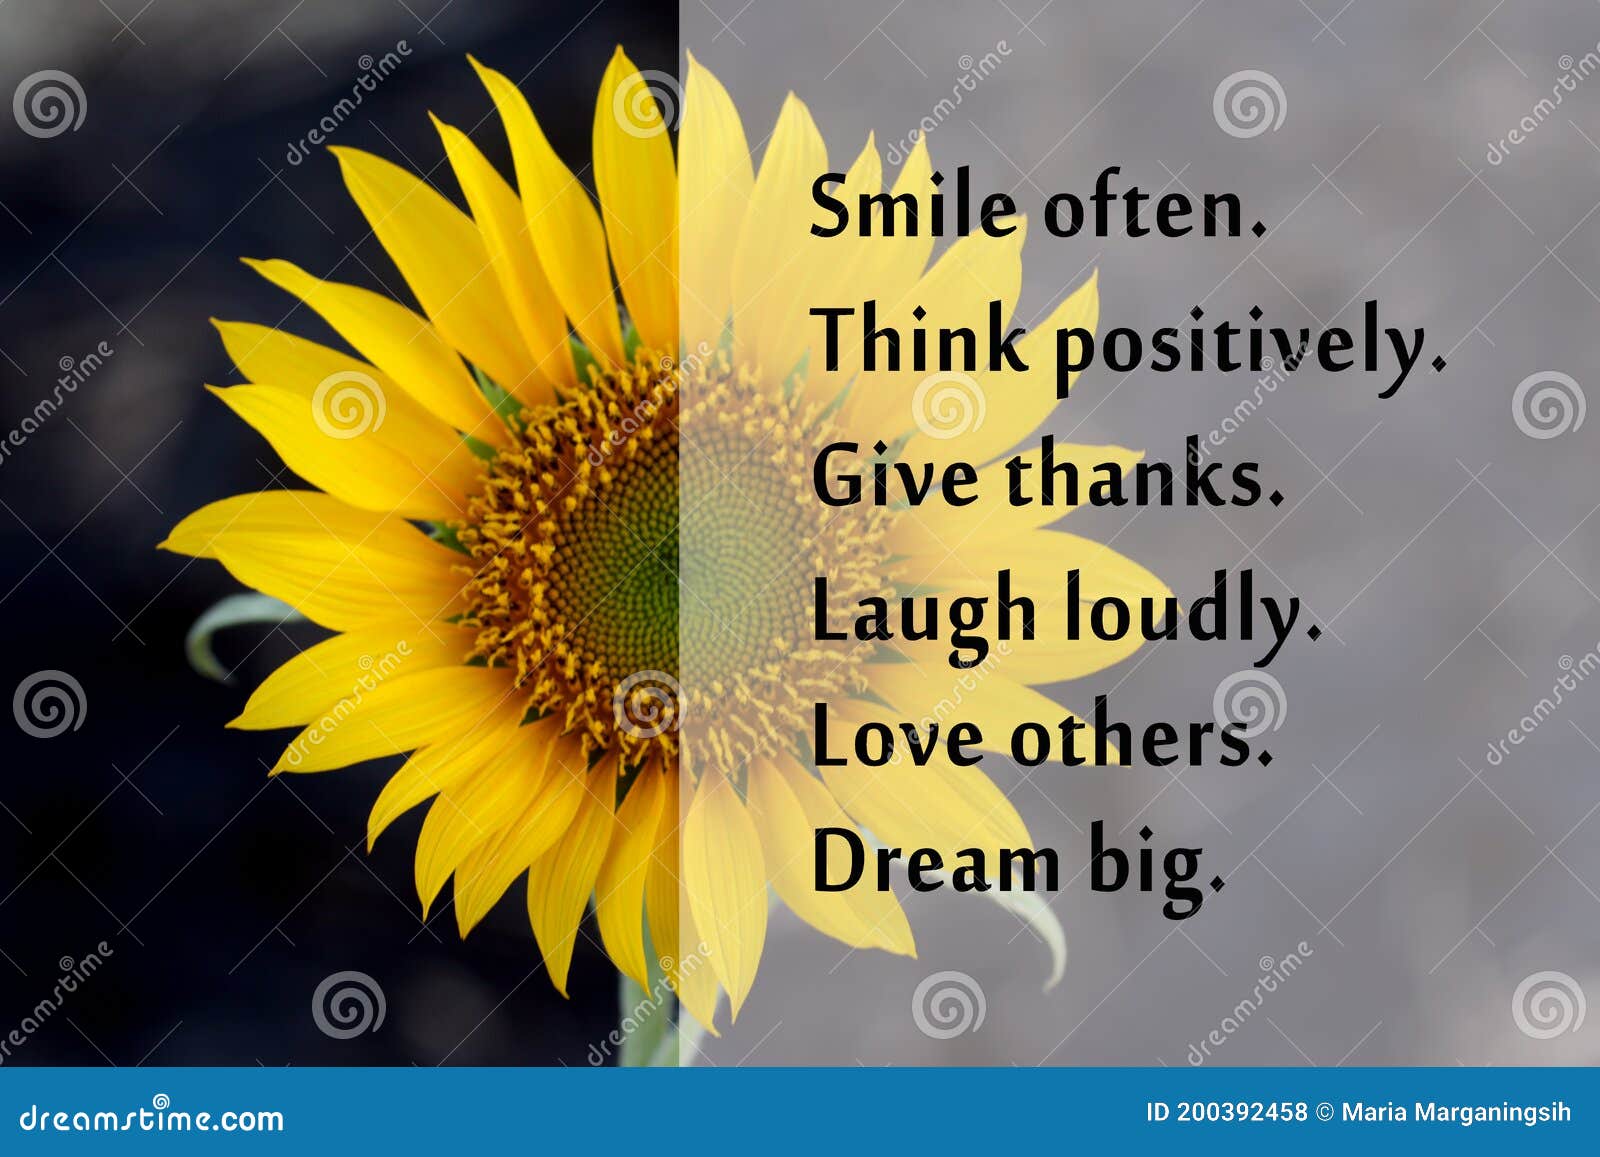 inspirational motivational words - smile often. think positive. give thanks. laugh loudly. love others. dream big. positivity.